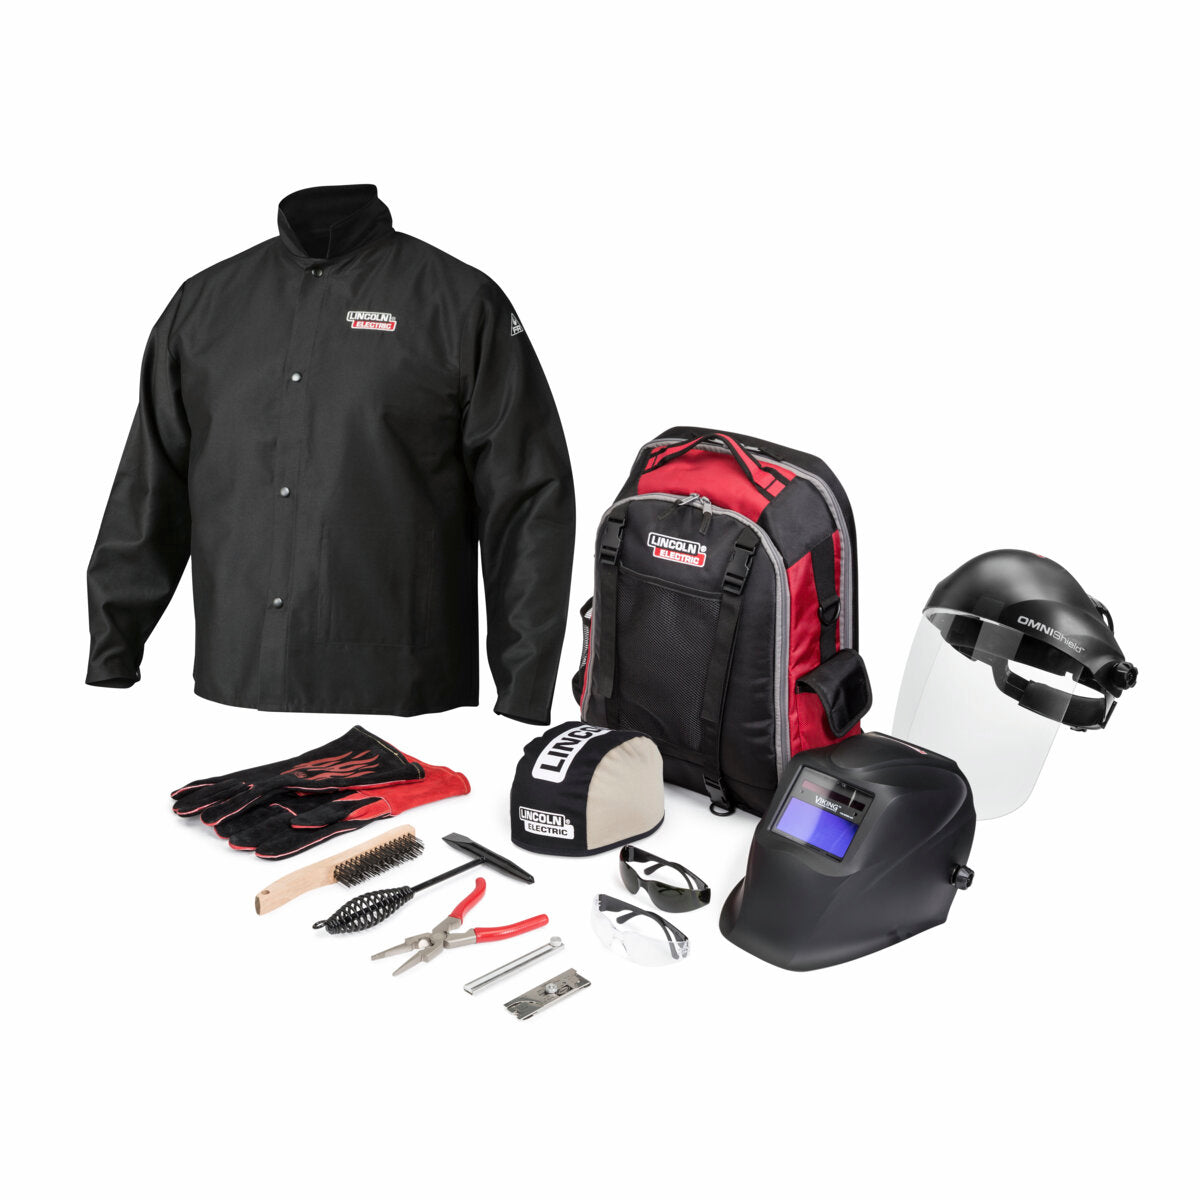 Lincoln Electric - Introductory Education Welding Gear Ready-Pak® - 2XL - K4590-2XL